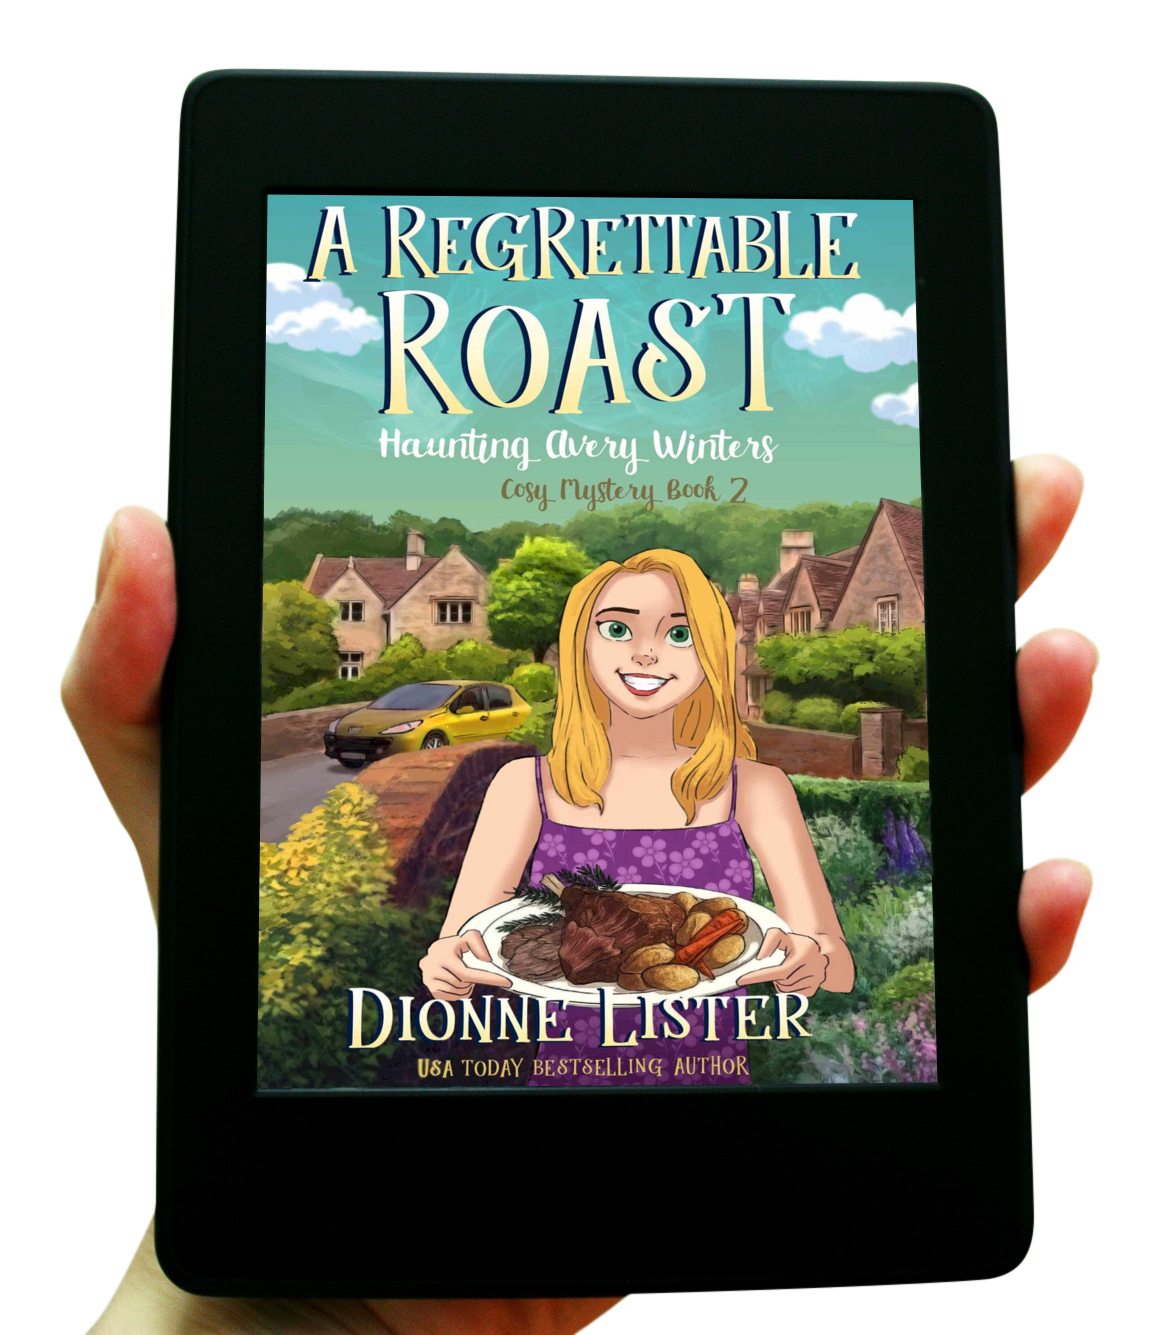 A Regrettable Roast—Haunting Avery Winters Book 2